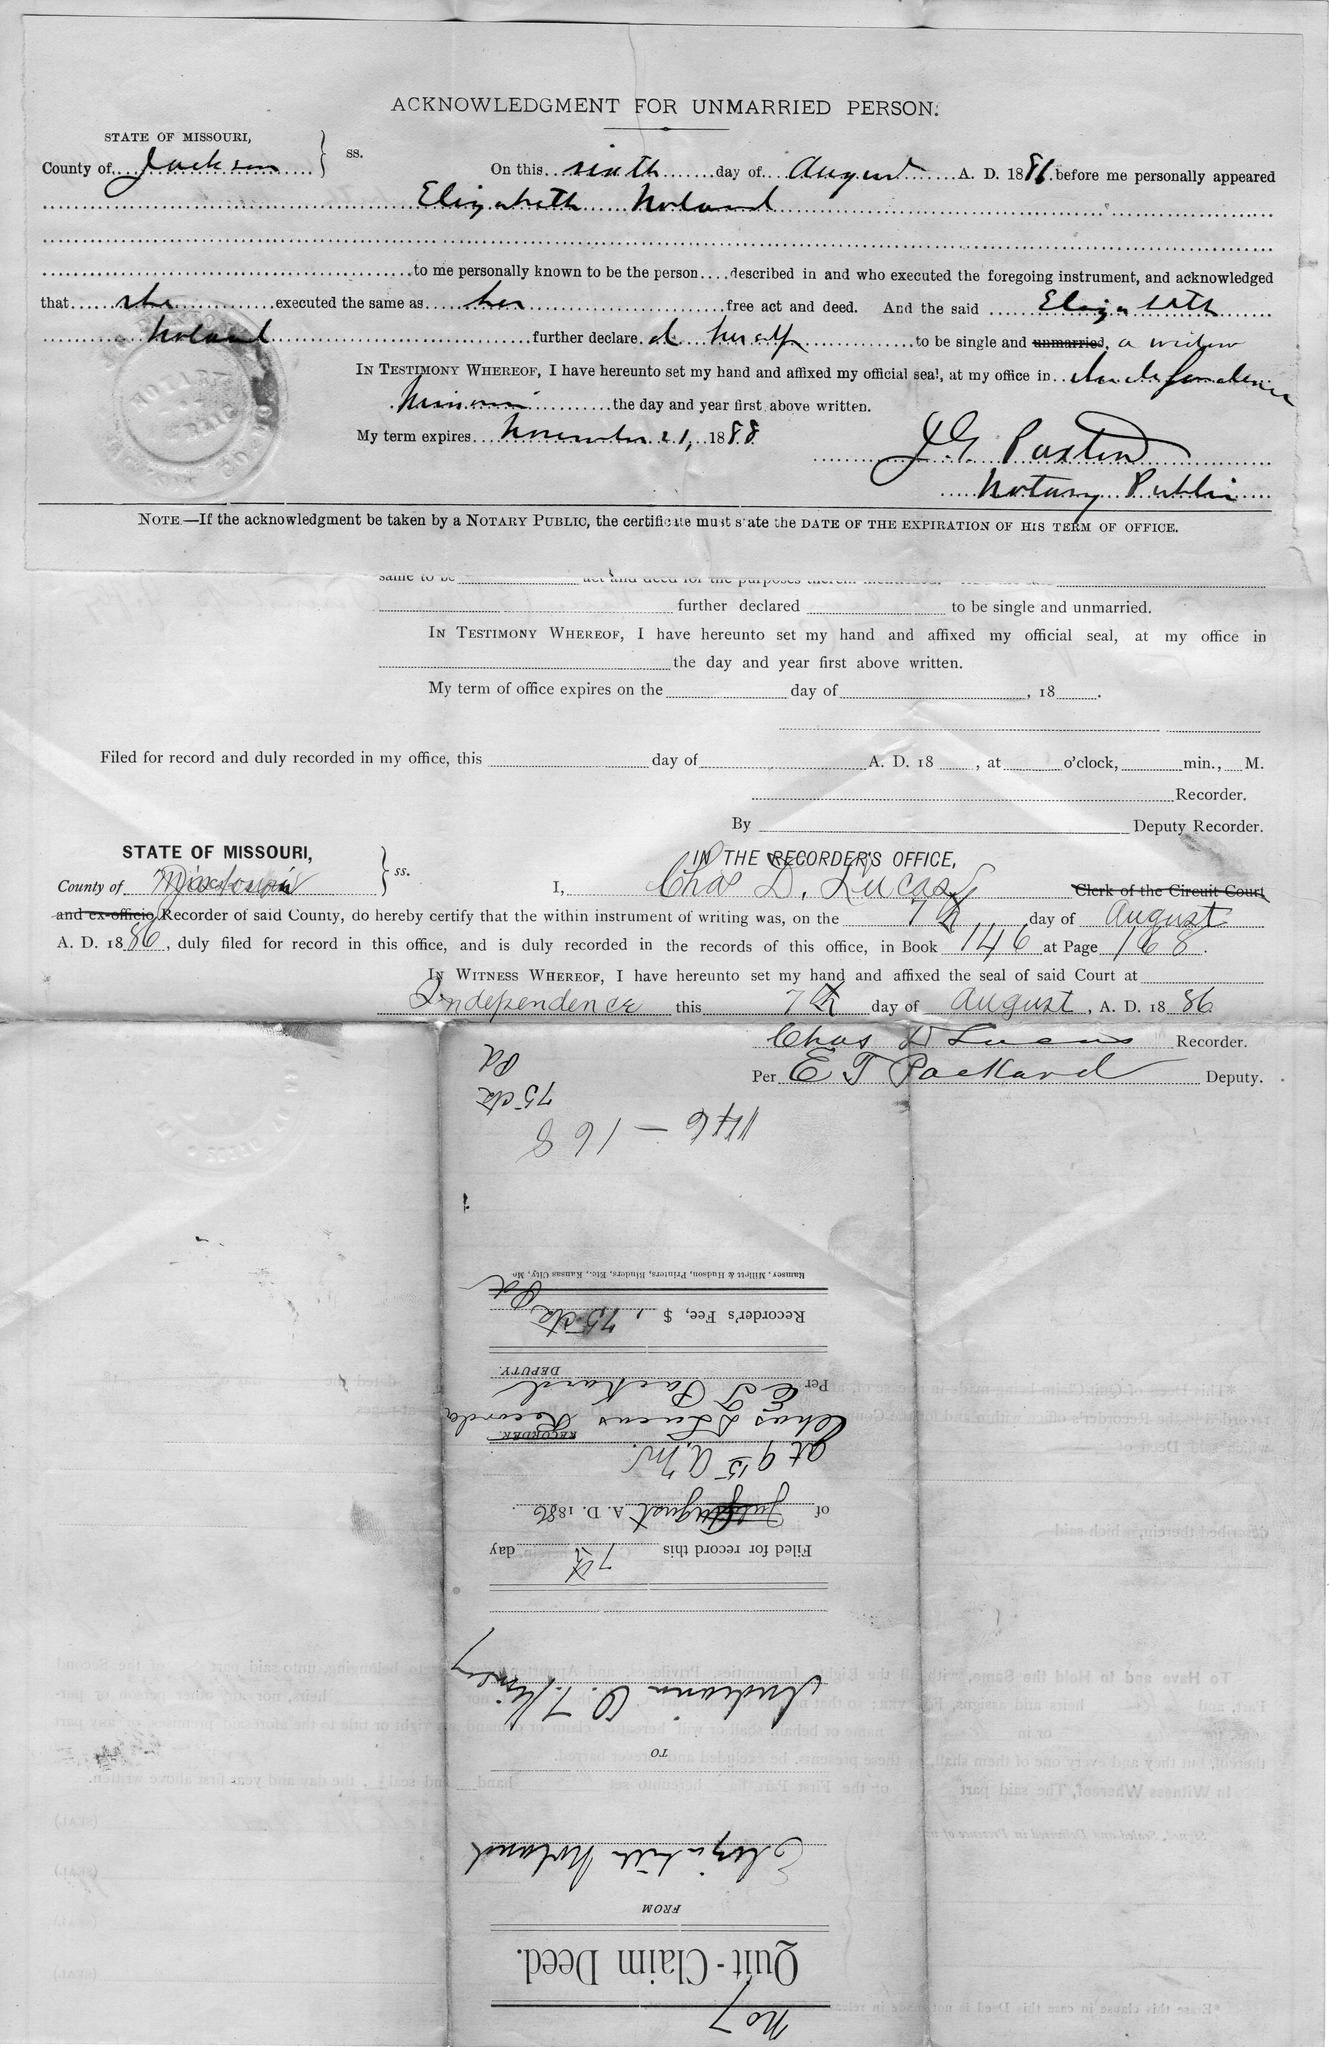 Quit-Claim Deed from Elizabeth Noland to Indiana O. J. Kinsey